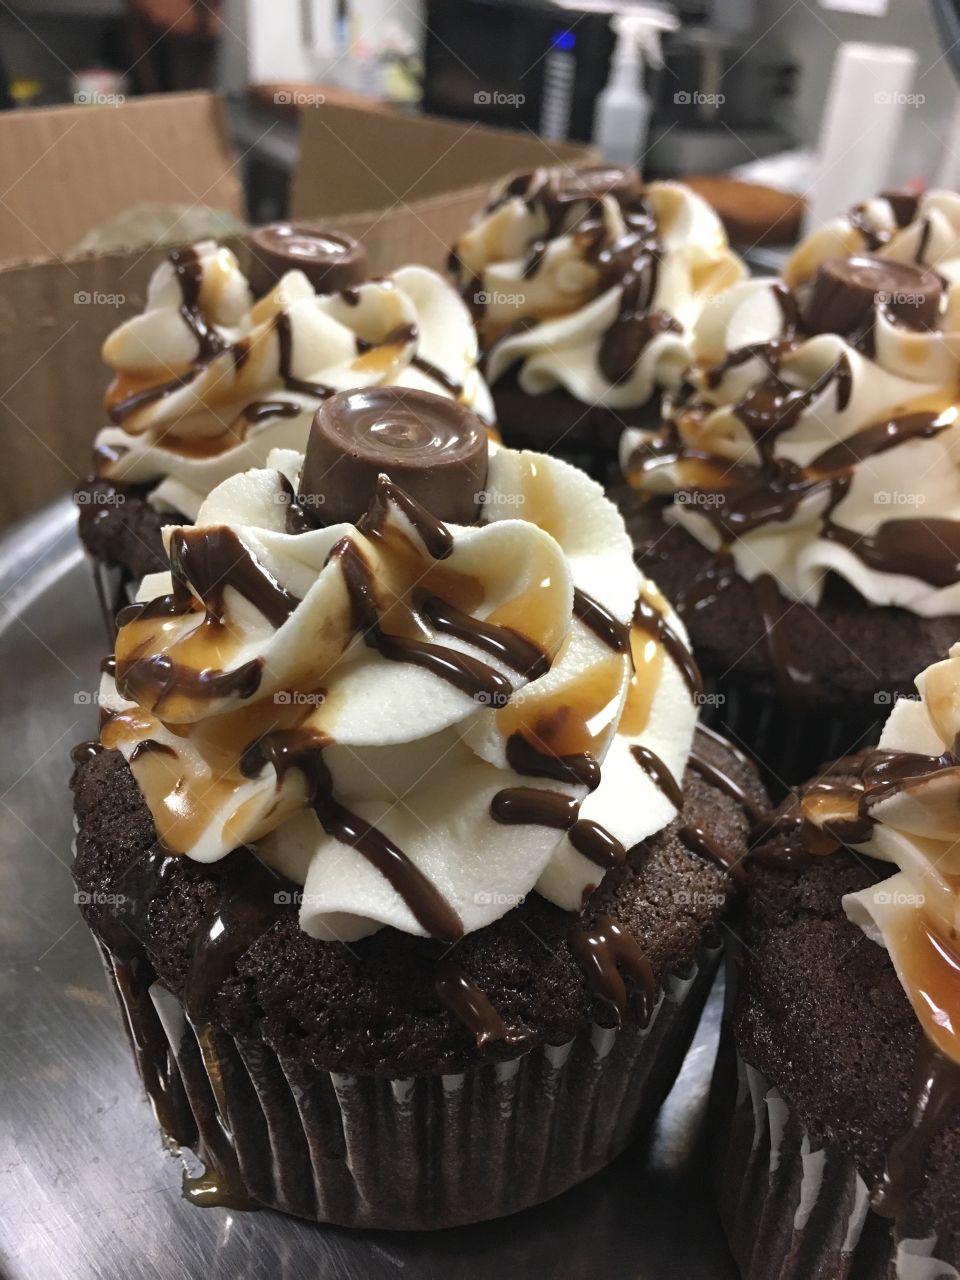 Rolo cupcakes